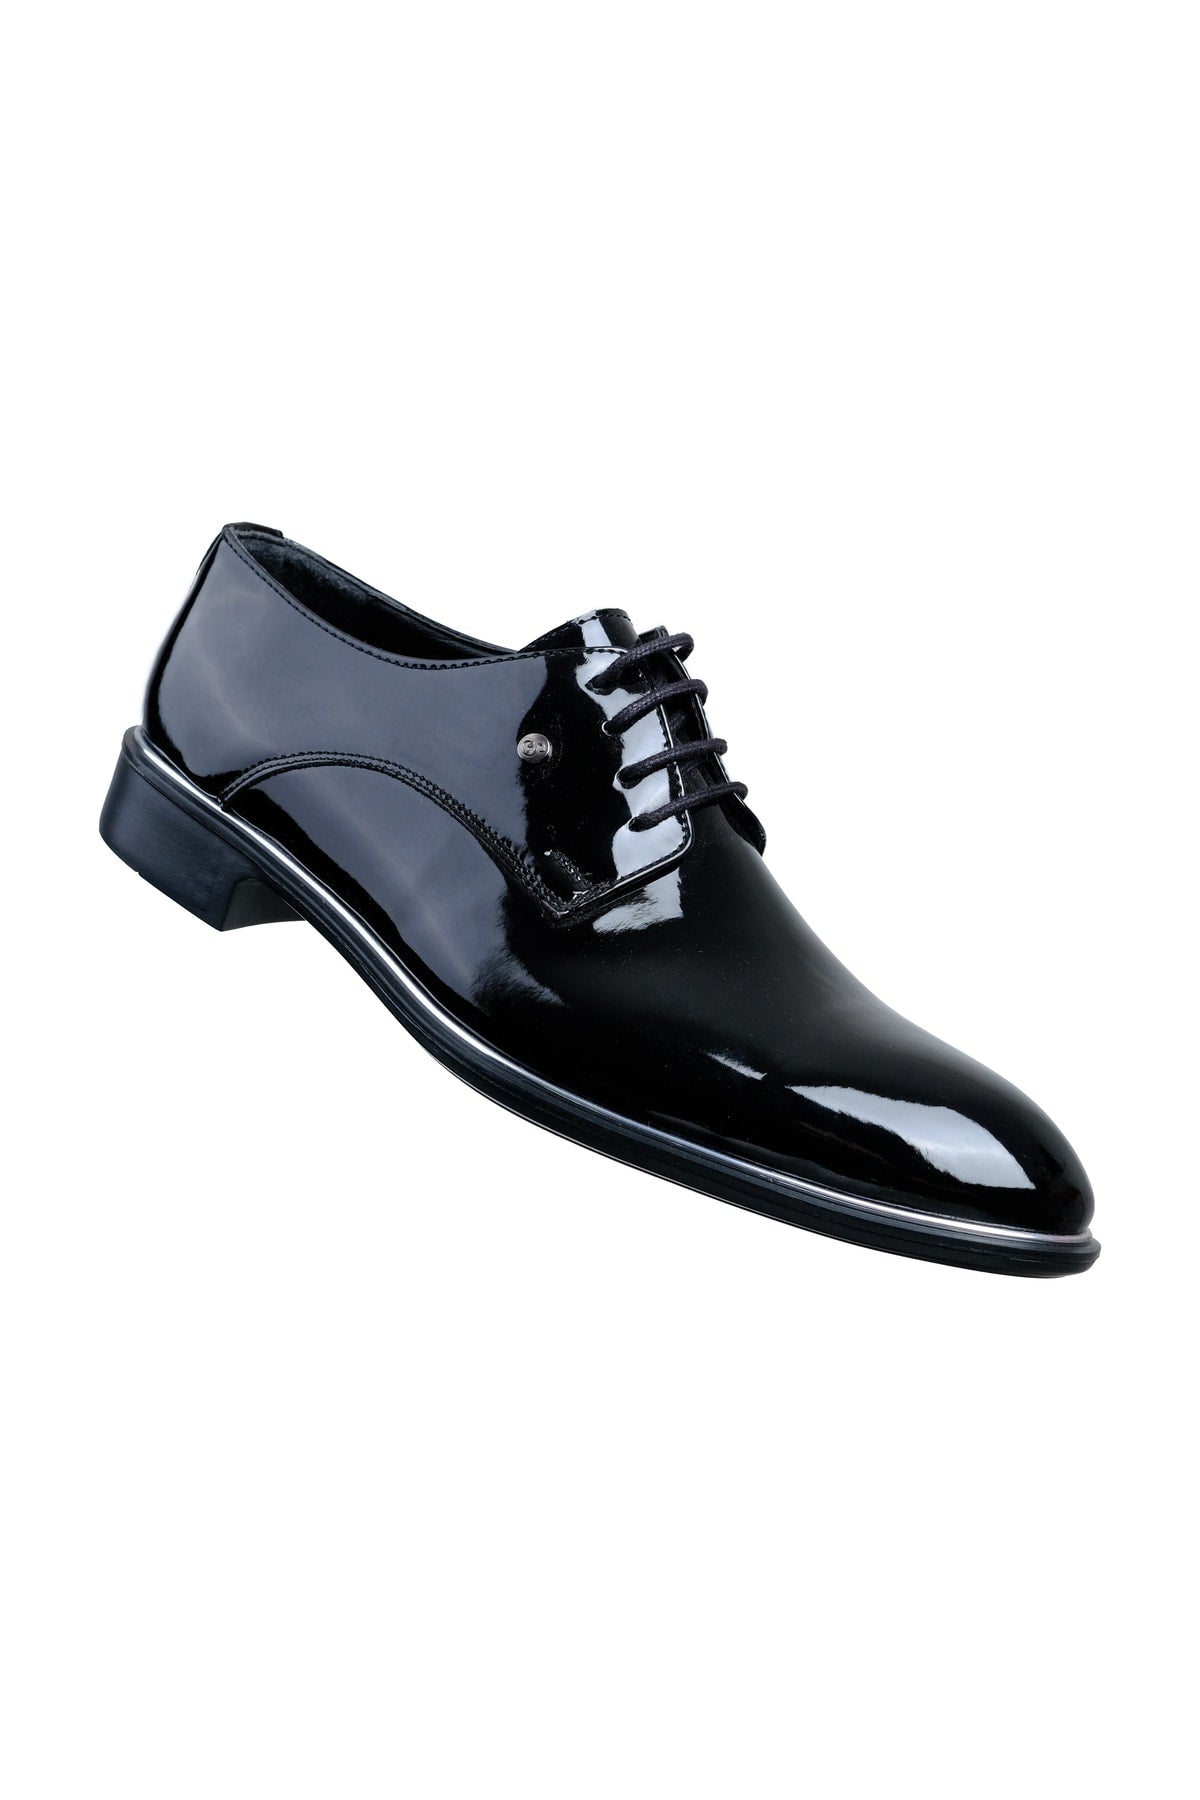 Patent Leather Classic Shoes Glossy